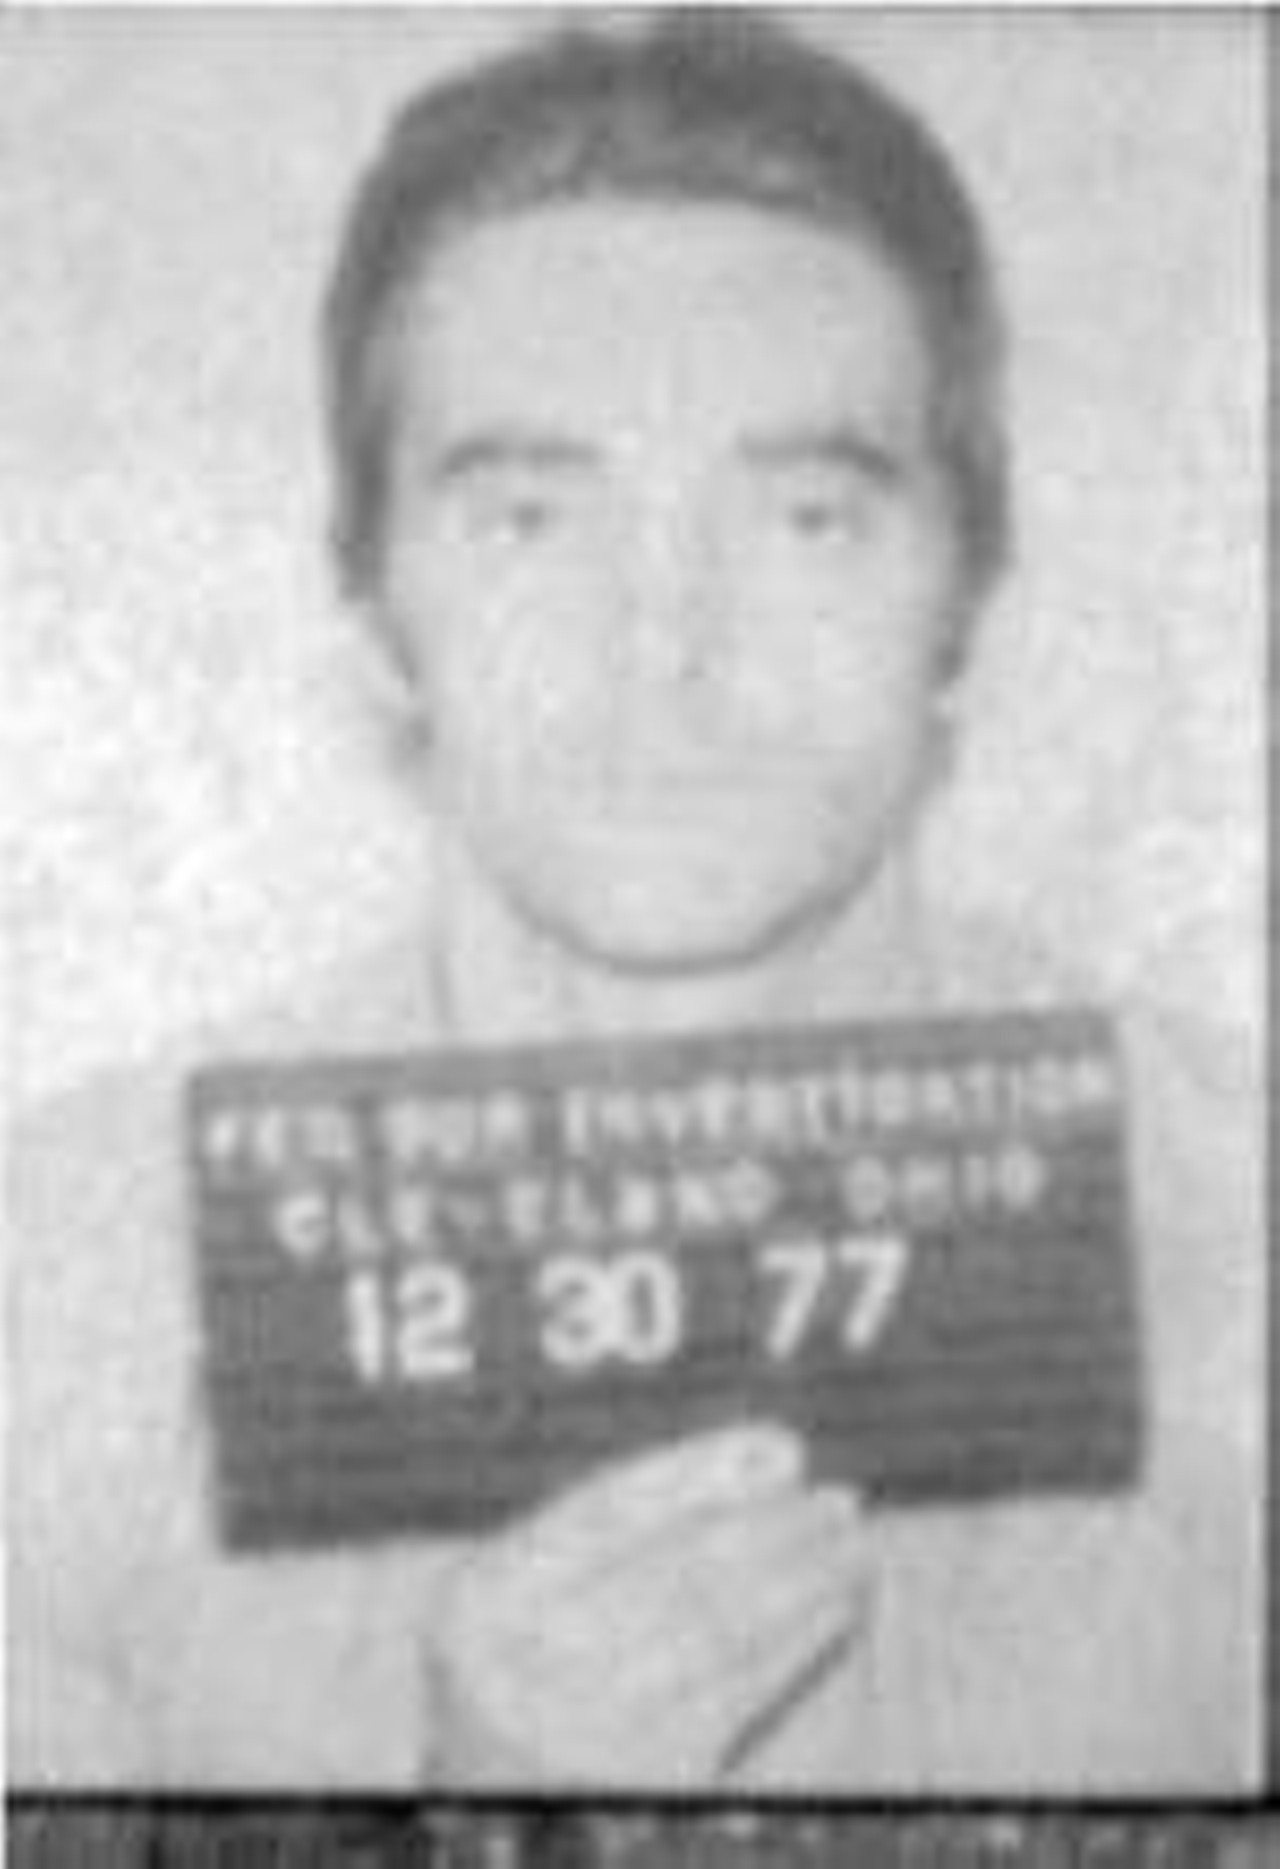 Alfred "Allie" Calabrese - Allie Calabrese was an associate and close pal to Bucthie Cisternino. A member of his burglary crew, Calabrese was another key figure and stake out man for a hit team determined to murder Irish mobster Danny Greene. Calabrese survived a car bombing in 1976. Prior to this he had been associated with the Cleveland syndicate since the late 1960s. He had served time in the past for burglary and bank robbery convictions. In 1995 he and gangland pal Joe Iacobacci were convicted of bank fraud and sentenced to three years in prison. It was believed he served most of the sentence and then was convicted of a probation violation.While in prison, Calabrese, suffering from diabates, became involved with a fight with another inmate. After a blow to the head he suffered a stroke and died in early August 1999.